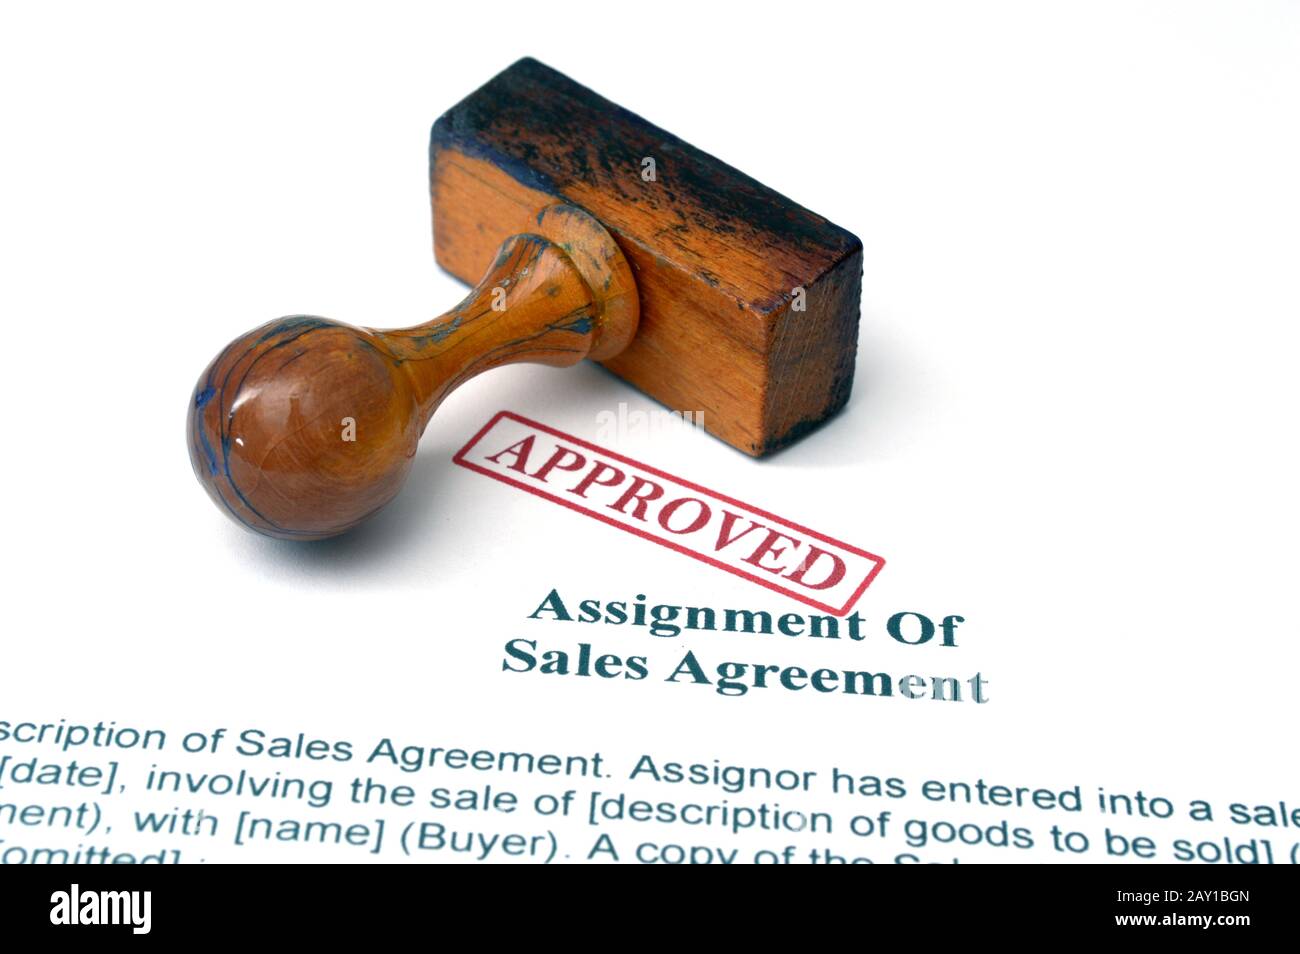 Assignment of sales agreement Stock Photo